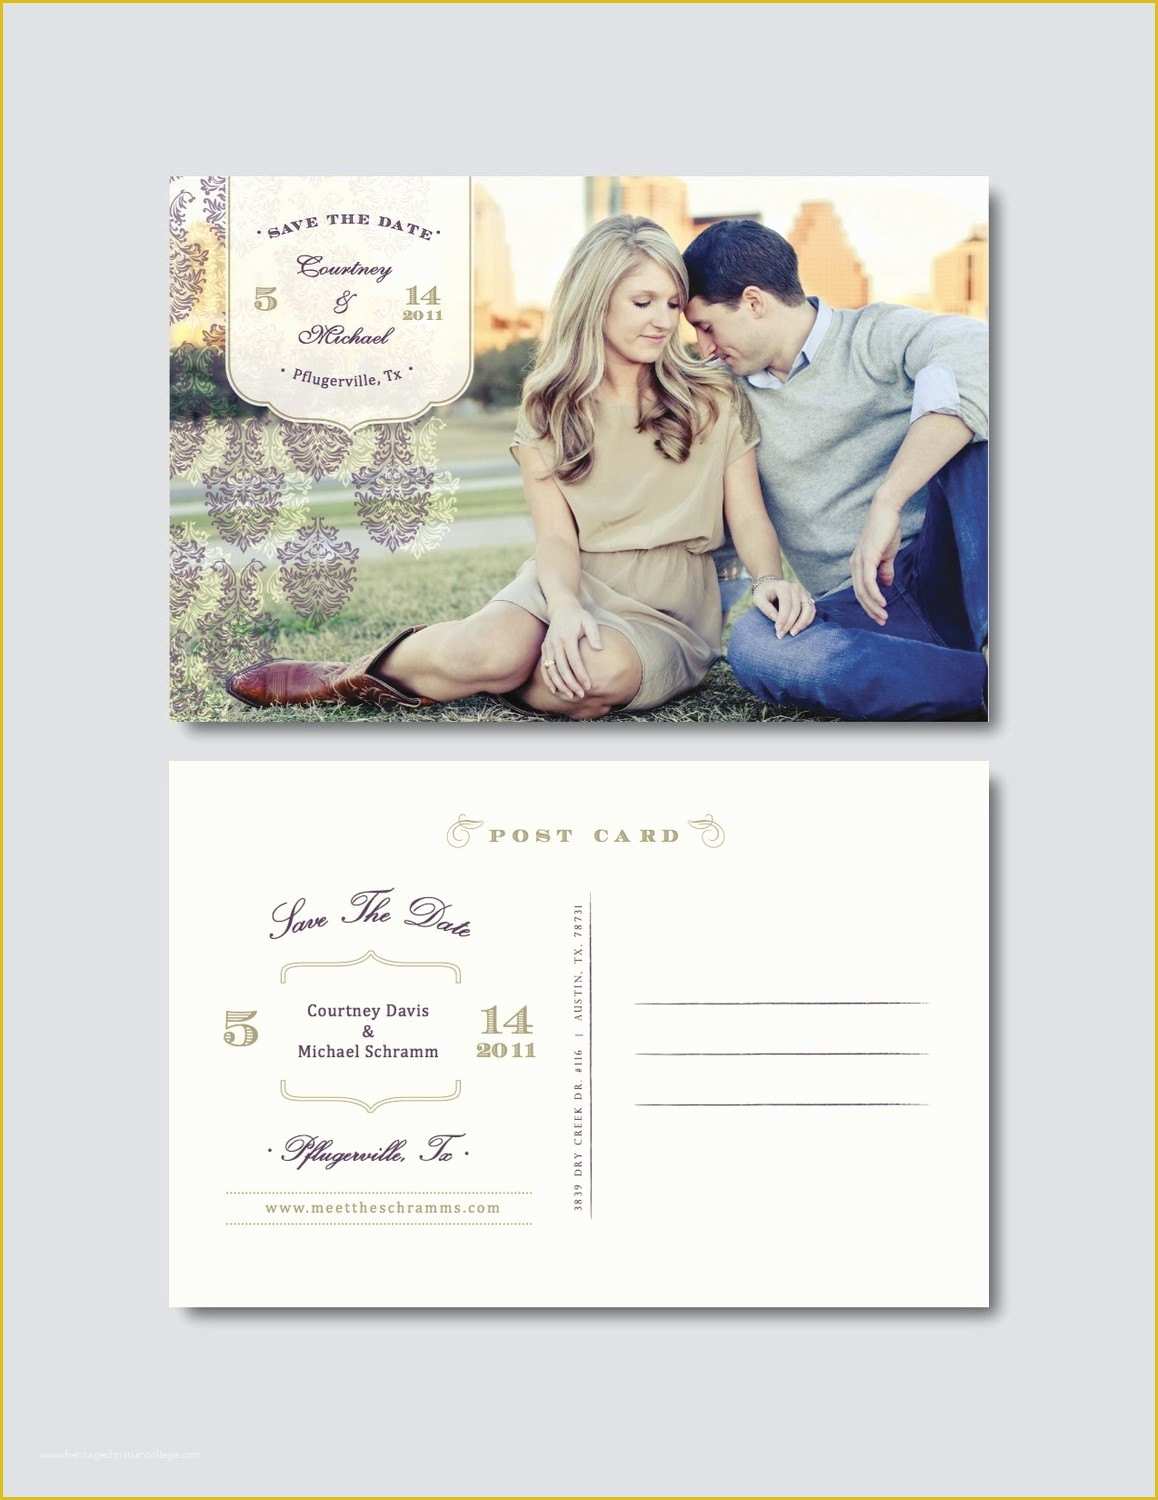 Postcard Template Free Download Of Vintage Save the Date Postcard Template Psd Digital